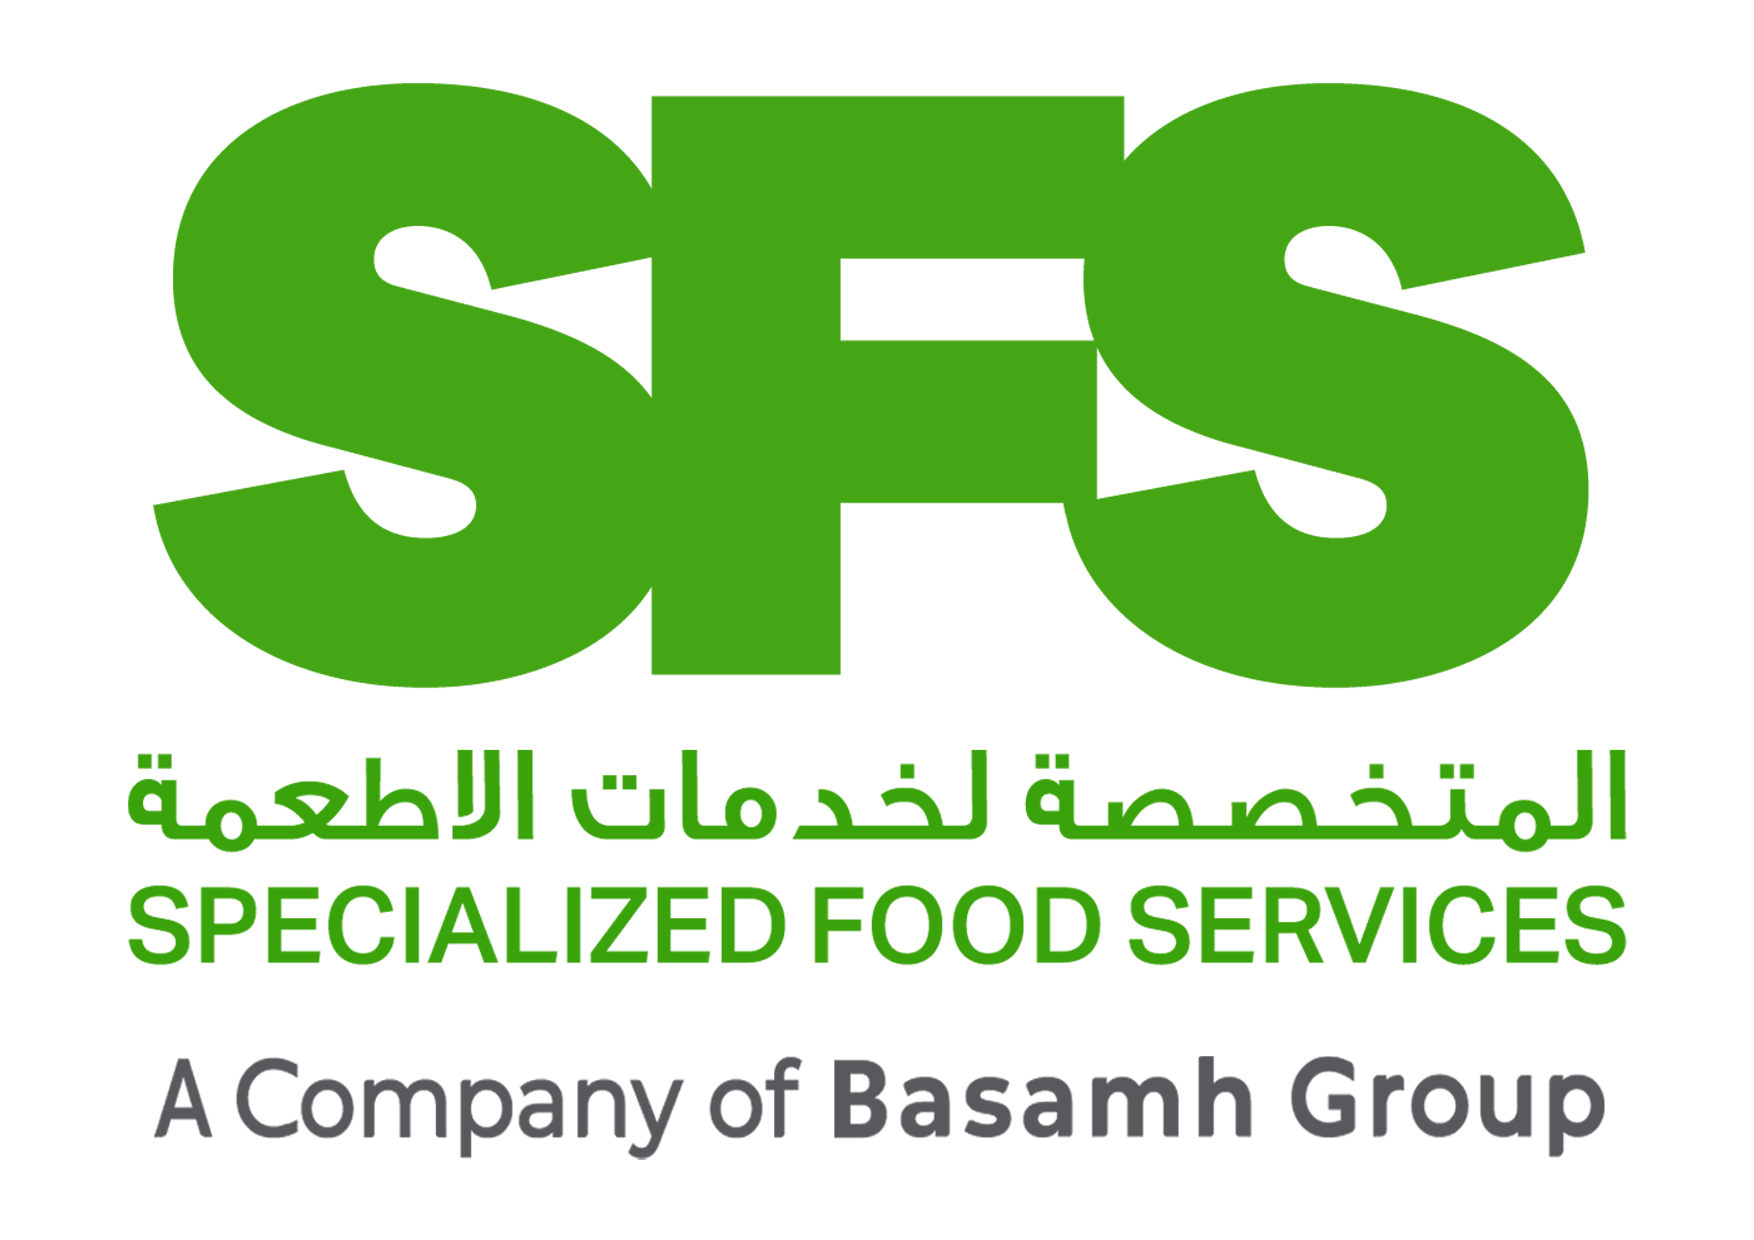 Specialized Food Services